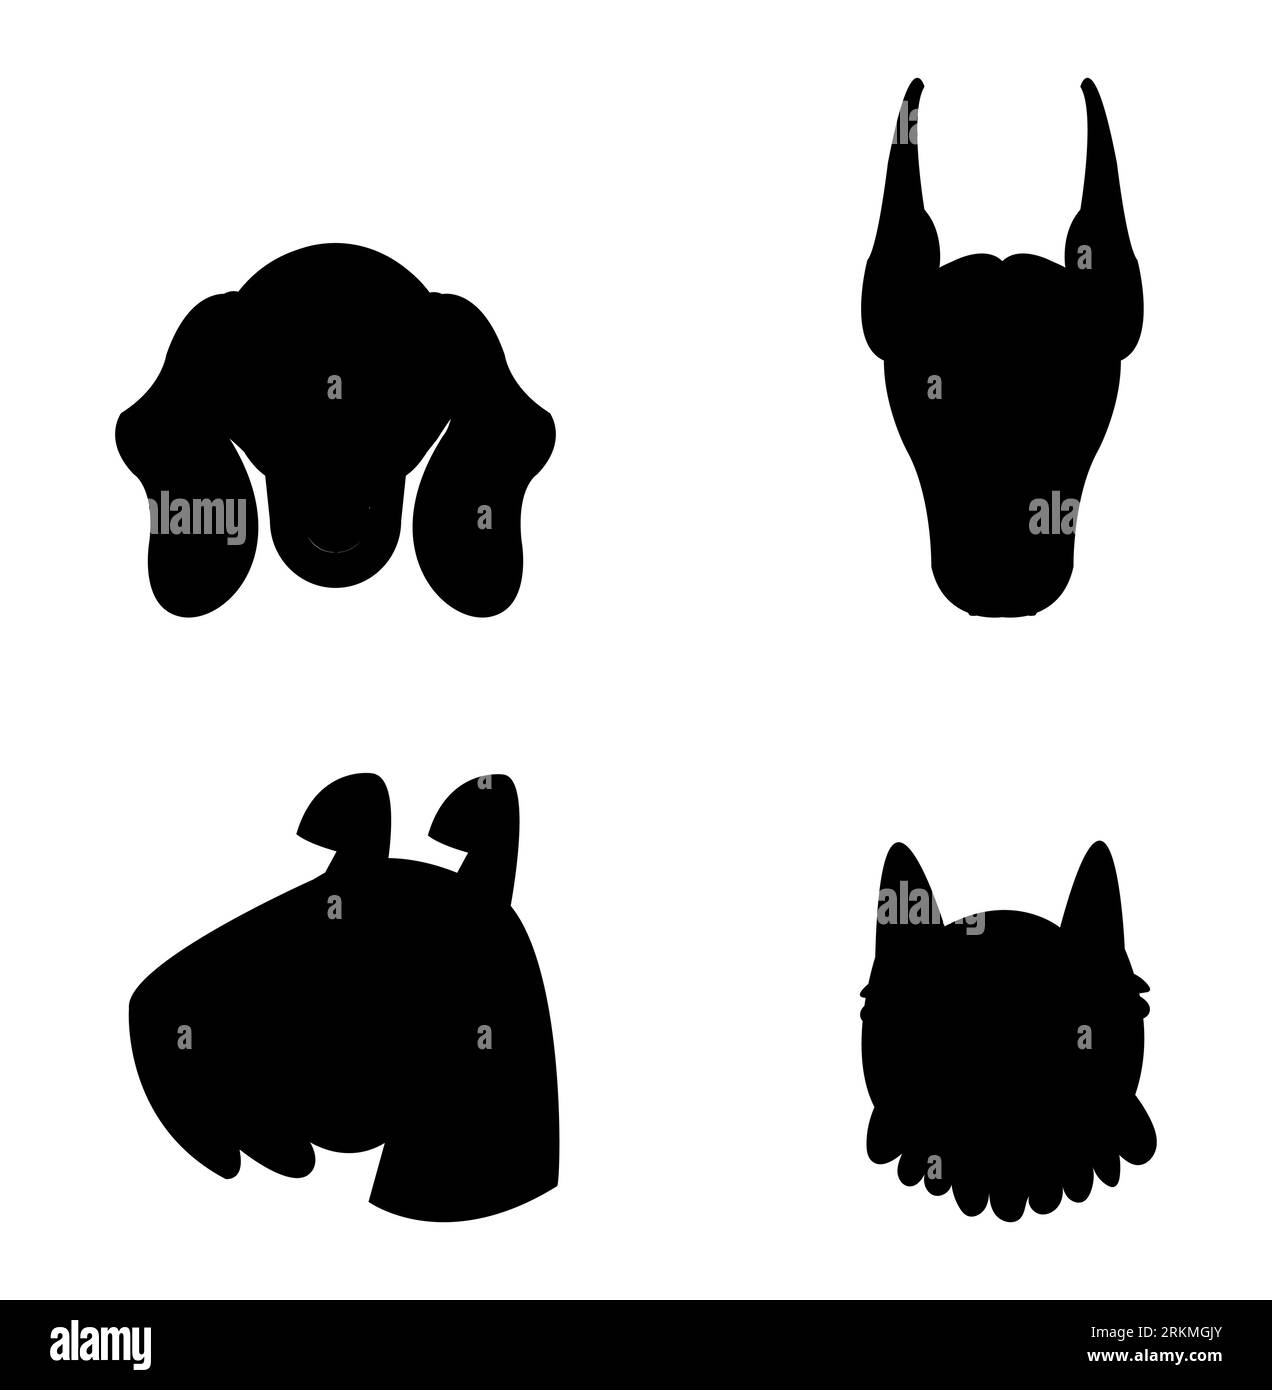 Black silhouette of four dog head mascots, cute puppy faces, Scottish Terrier, schnauzer, Doberman Pinscher, and Dachshund vector isolated on white Stock Vector